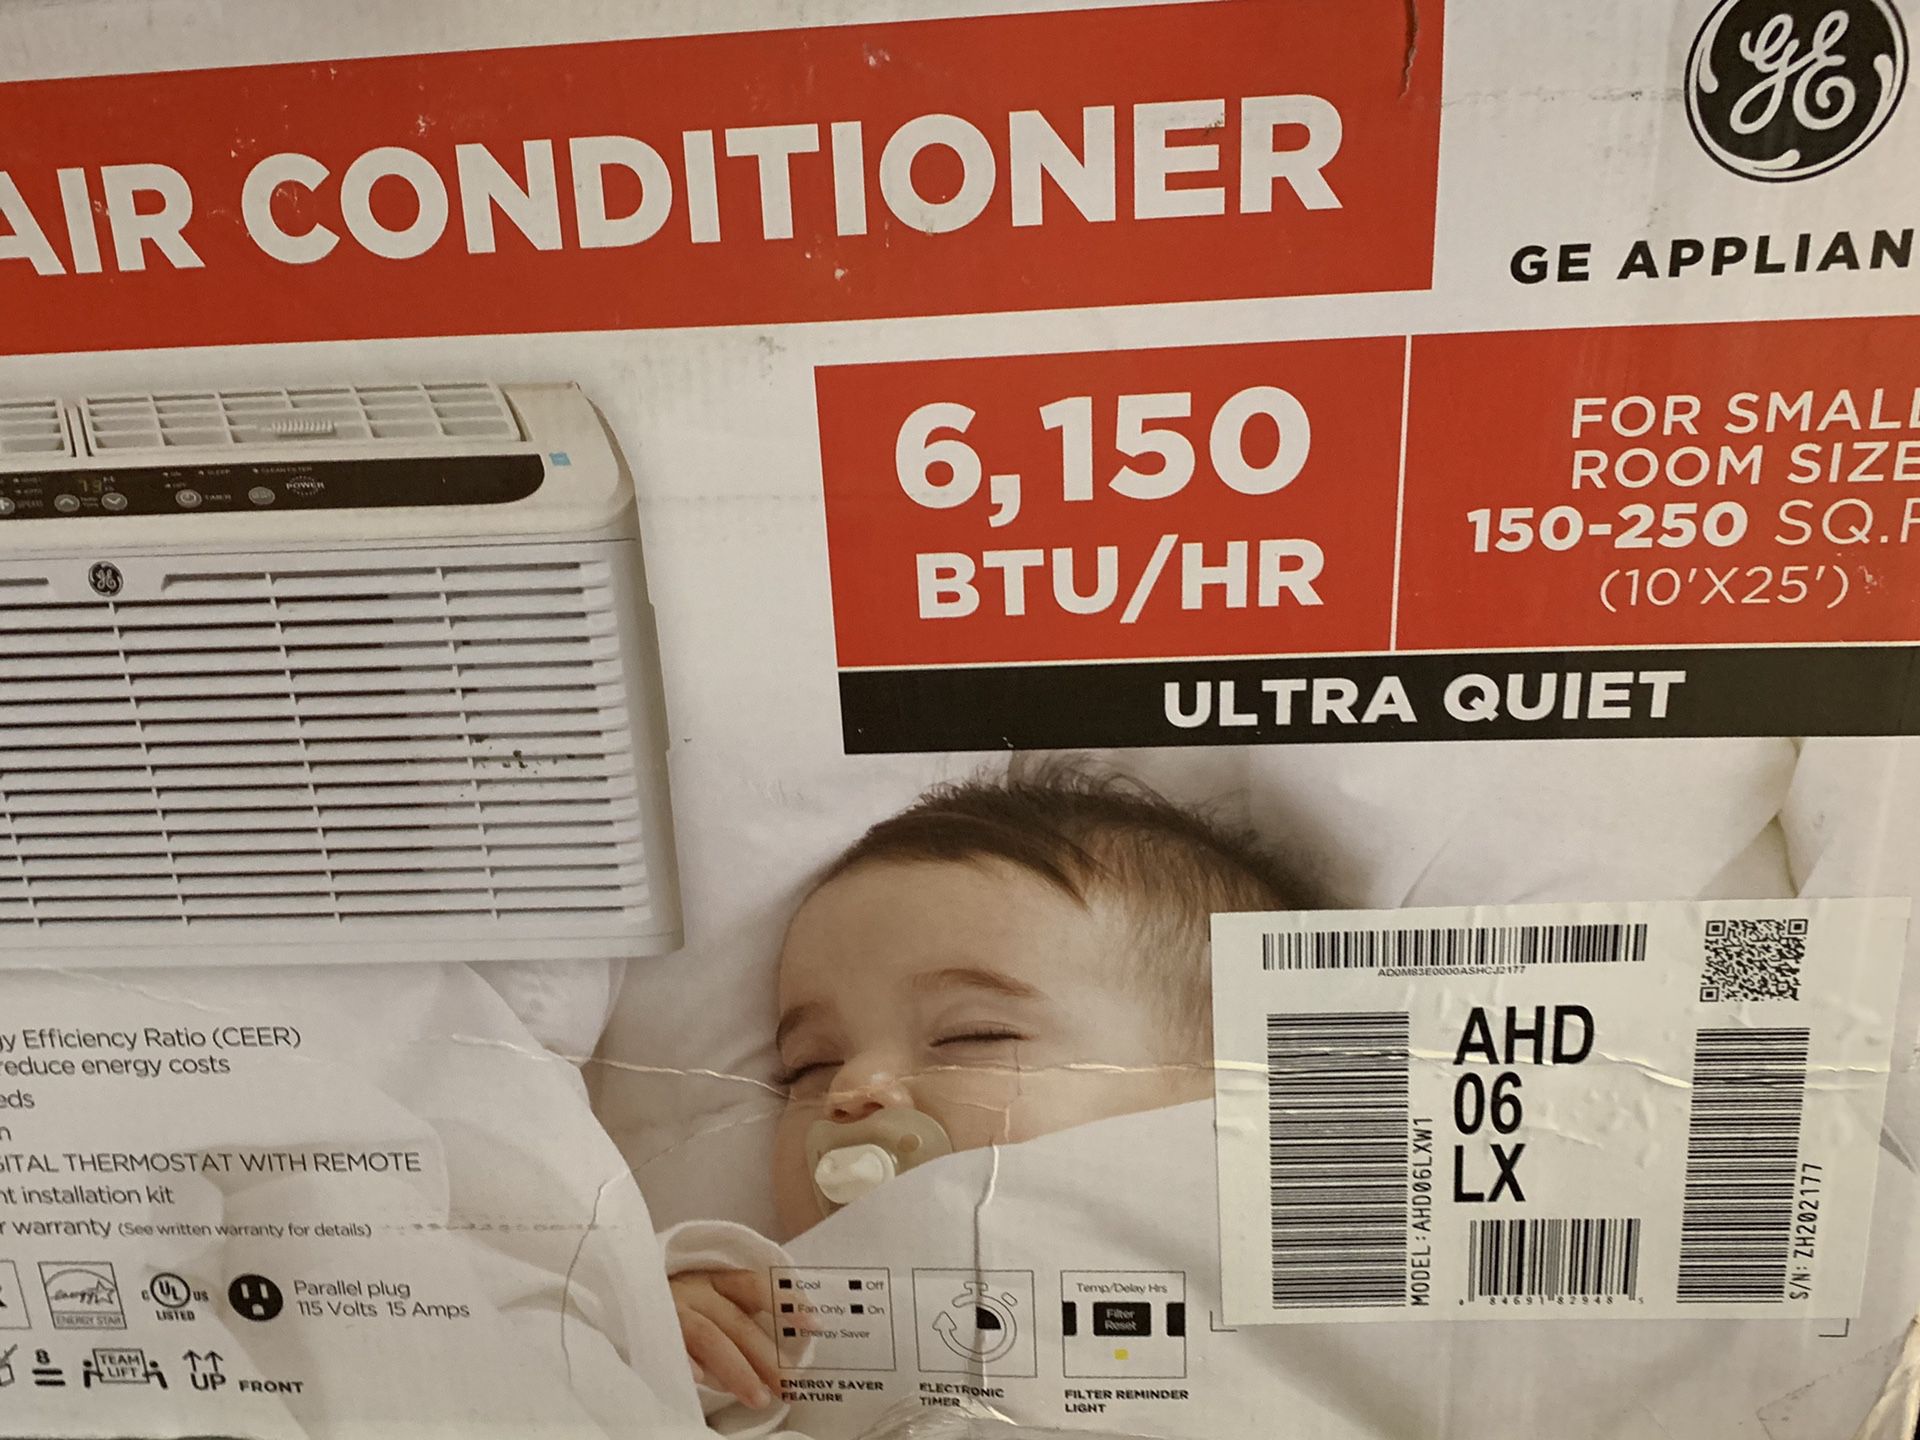 BEST DEAL IN TOWN!! Brand new 6150 BTU GE is ultra quiet motor high end window ac air conditioner. $340 at store!!